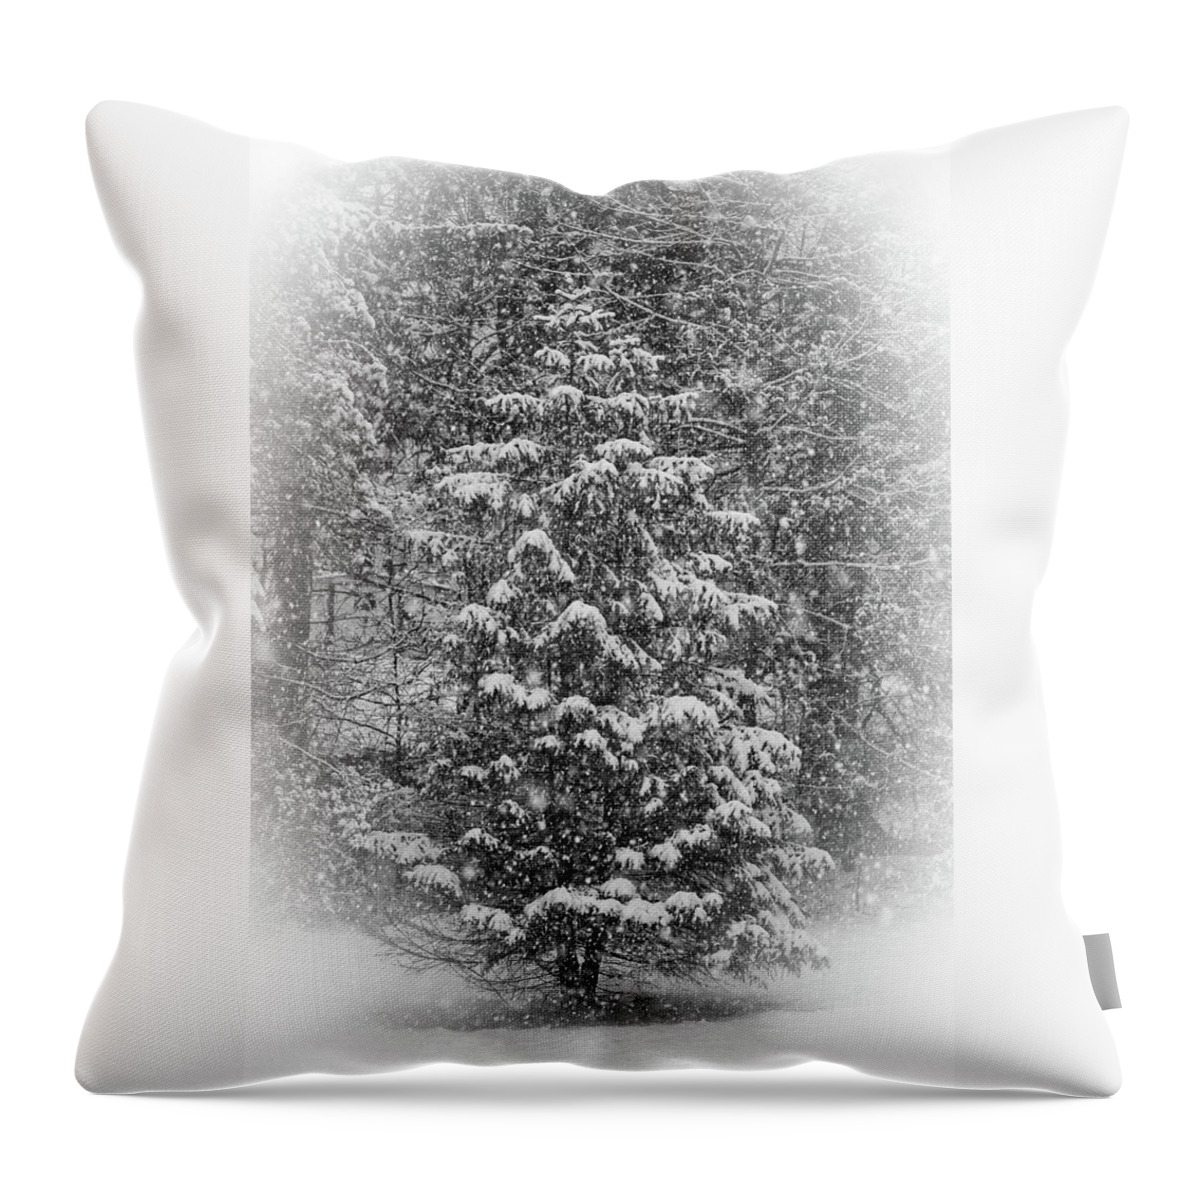 Black And White Throw Pillow featuring the photograph Winter Greeting Card by Scott Burd